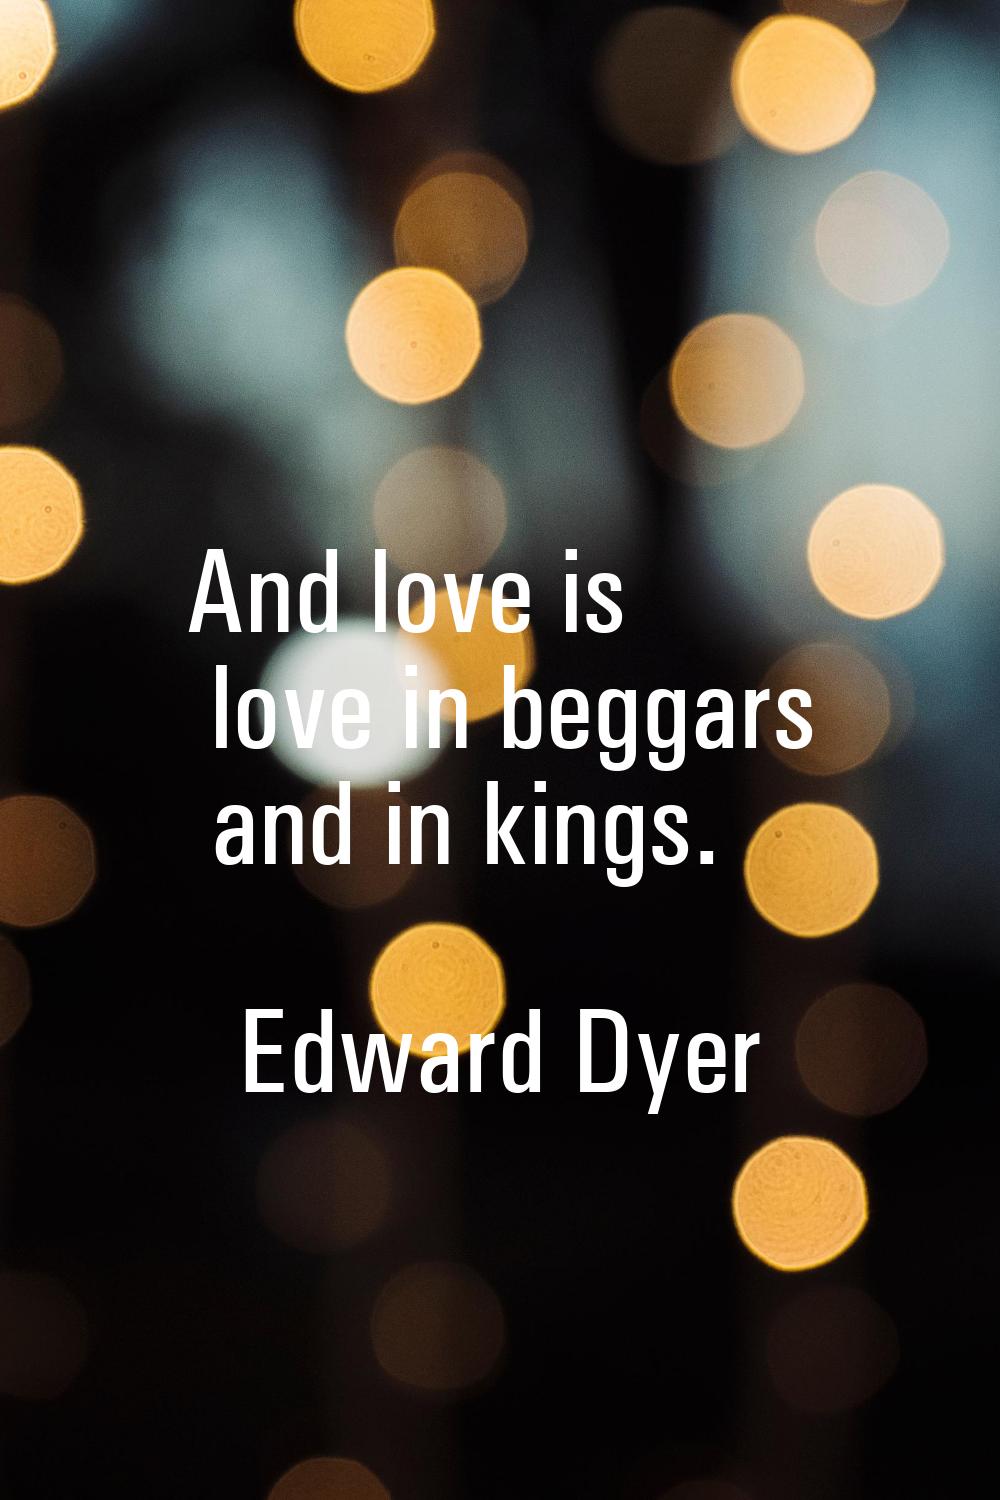 And love is love in beggars and in kings.